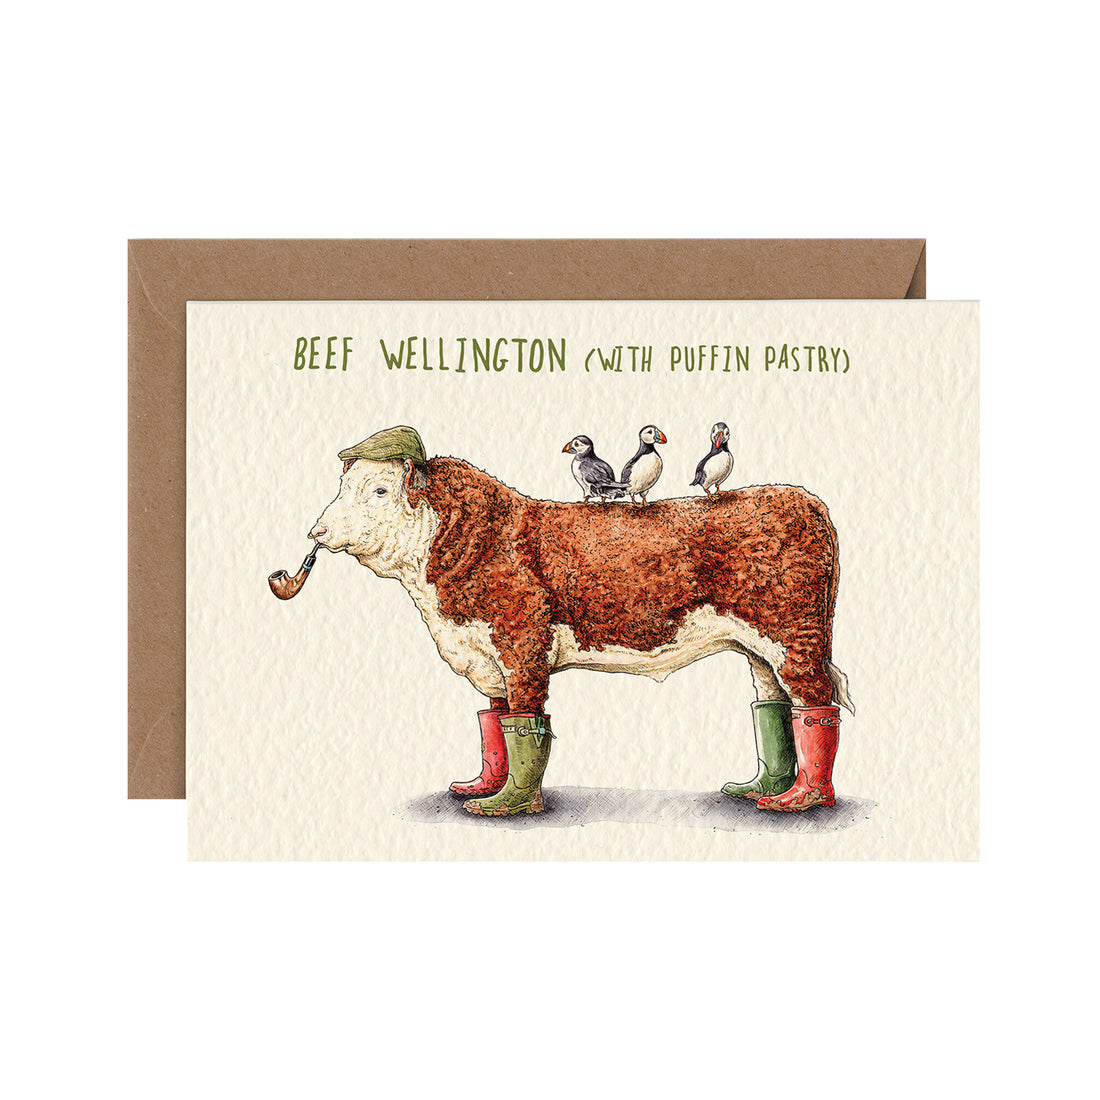 A Hester &amp; Cook Beef Wellington (With Puffin Pastry) Card, with an illustration of a cow wearing wellington boots with three puffin birds standing on its back.